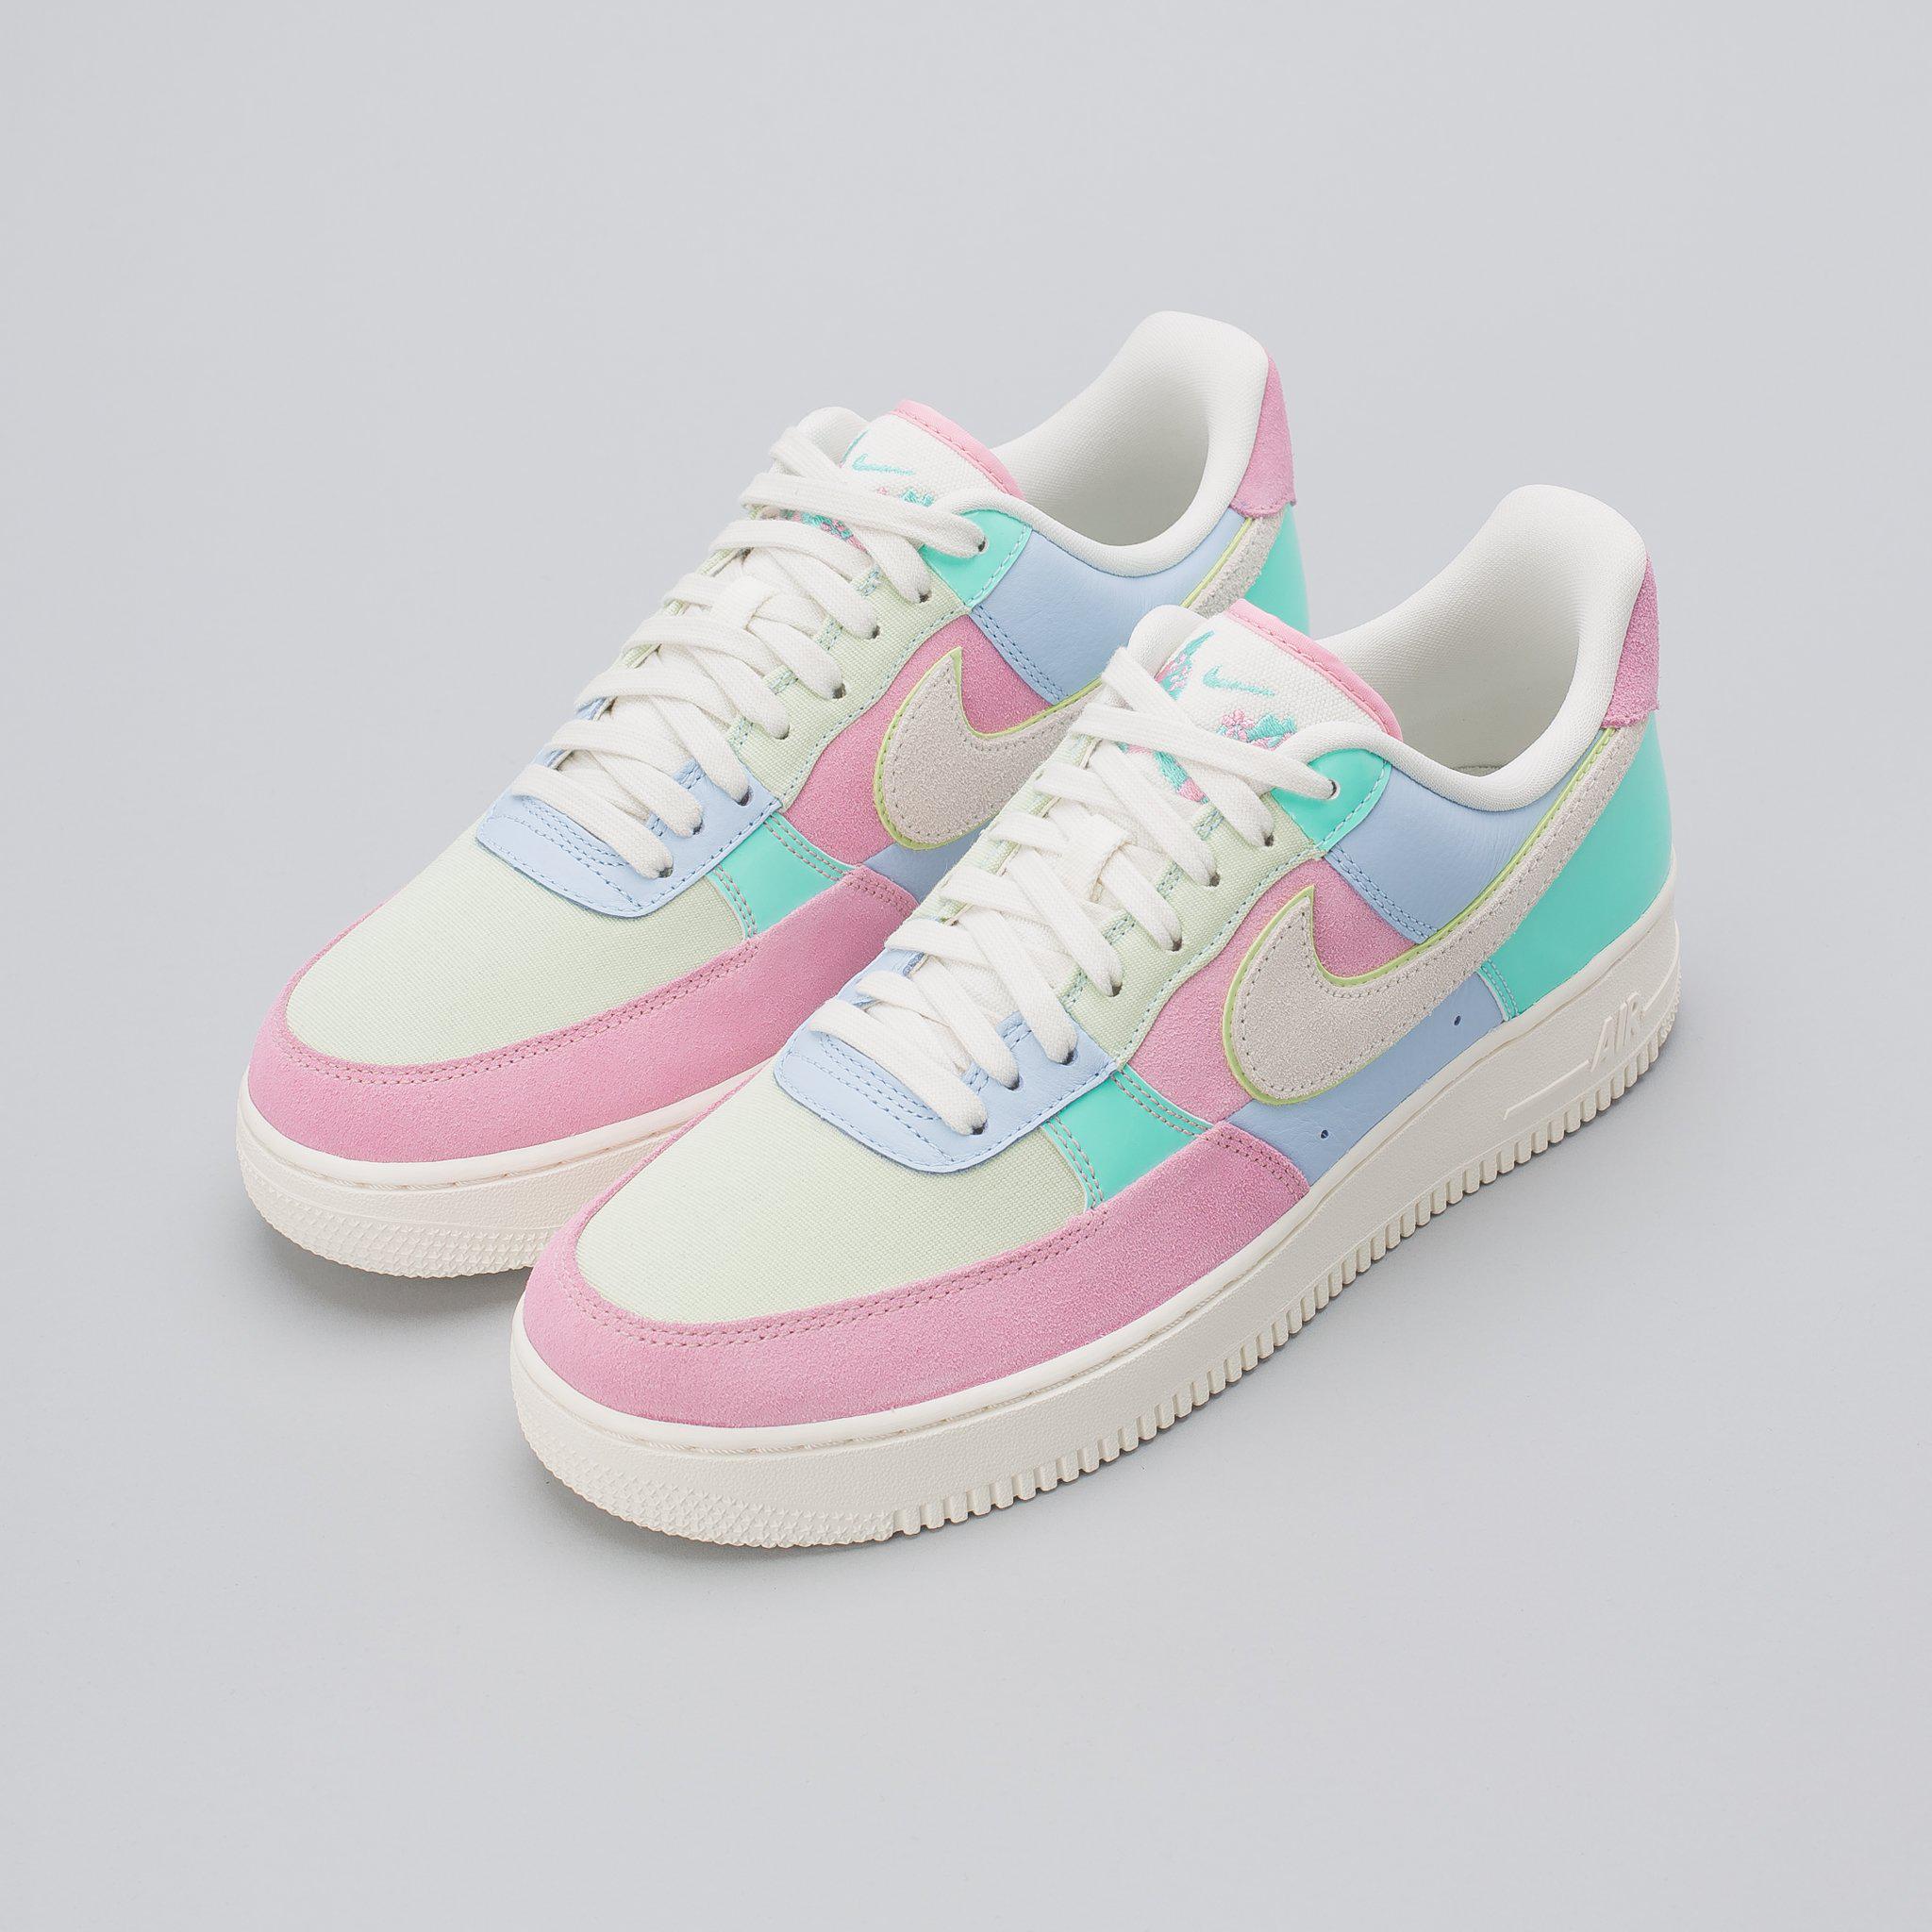 Nike Suede Air Force 1 07 Qs Easter In 